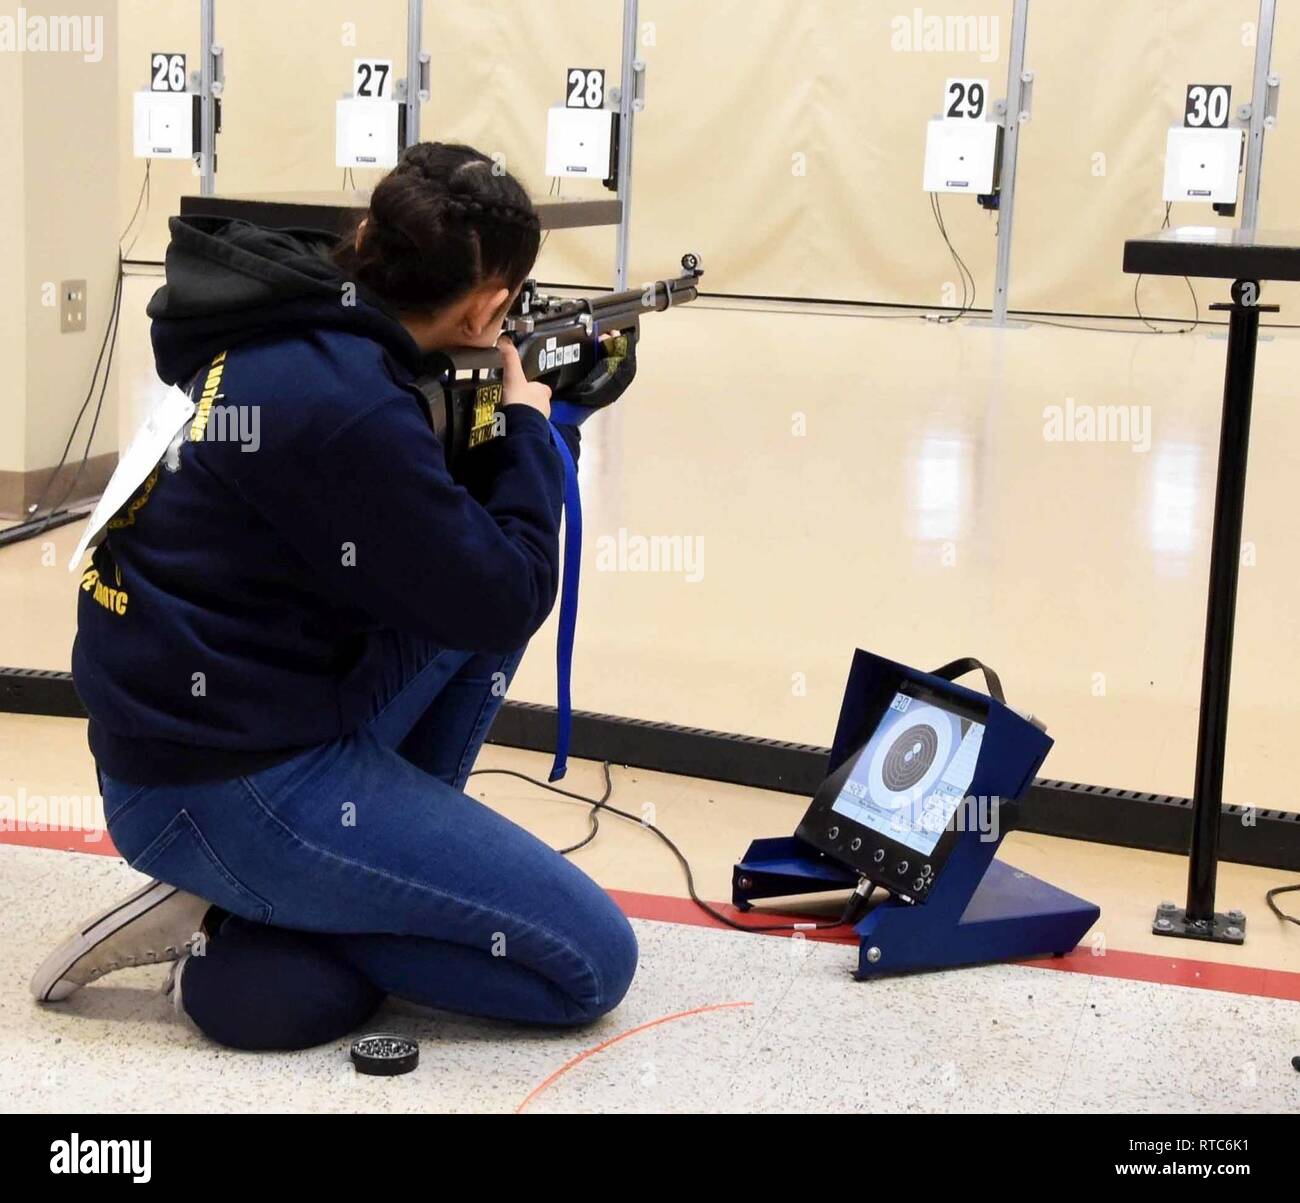 ANNISTON, Ala., (February 9, 2019) – Navy Junior Reserve Officers Training Corps (NJROTC) Cadet Mya Gonzalez, from Santa Fe, New Mexico High School, fires in the kneeling position during the Sporter Division portion of the NJROTC Air Rifle Championship in Anniston, Ala., Feb. 8-9. Santa Fe was the winning Sporter Division unit in this year’s competition that included nearly 200 NJROTC cadets from high schools across the United States. Stock Photo